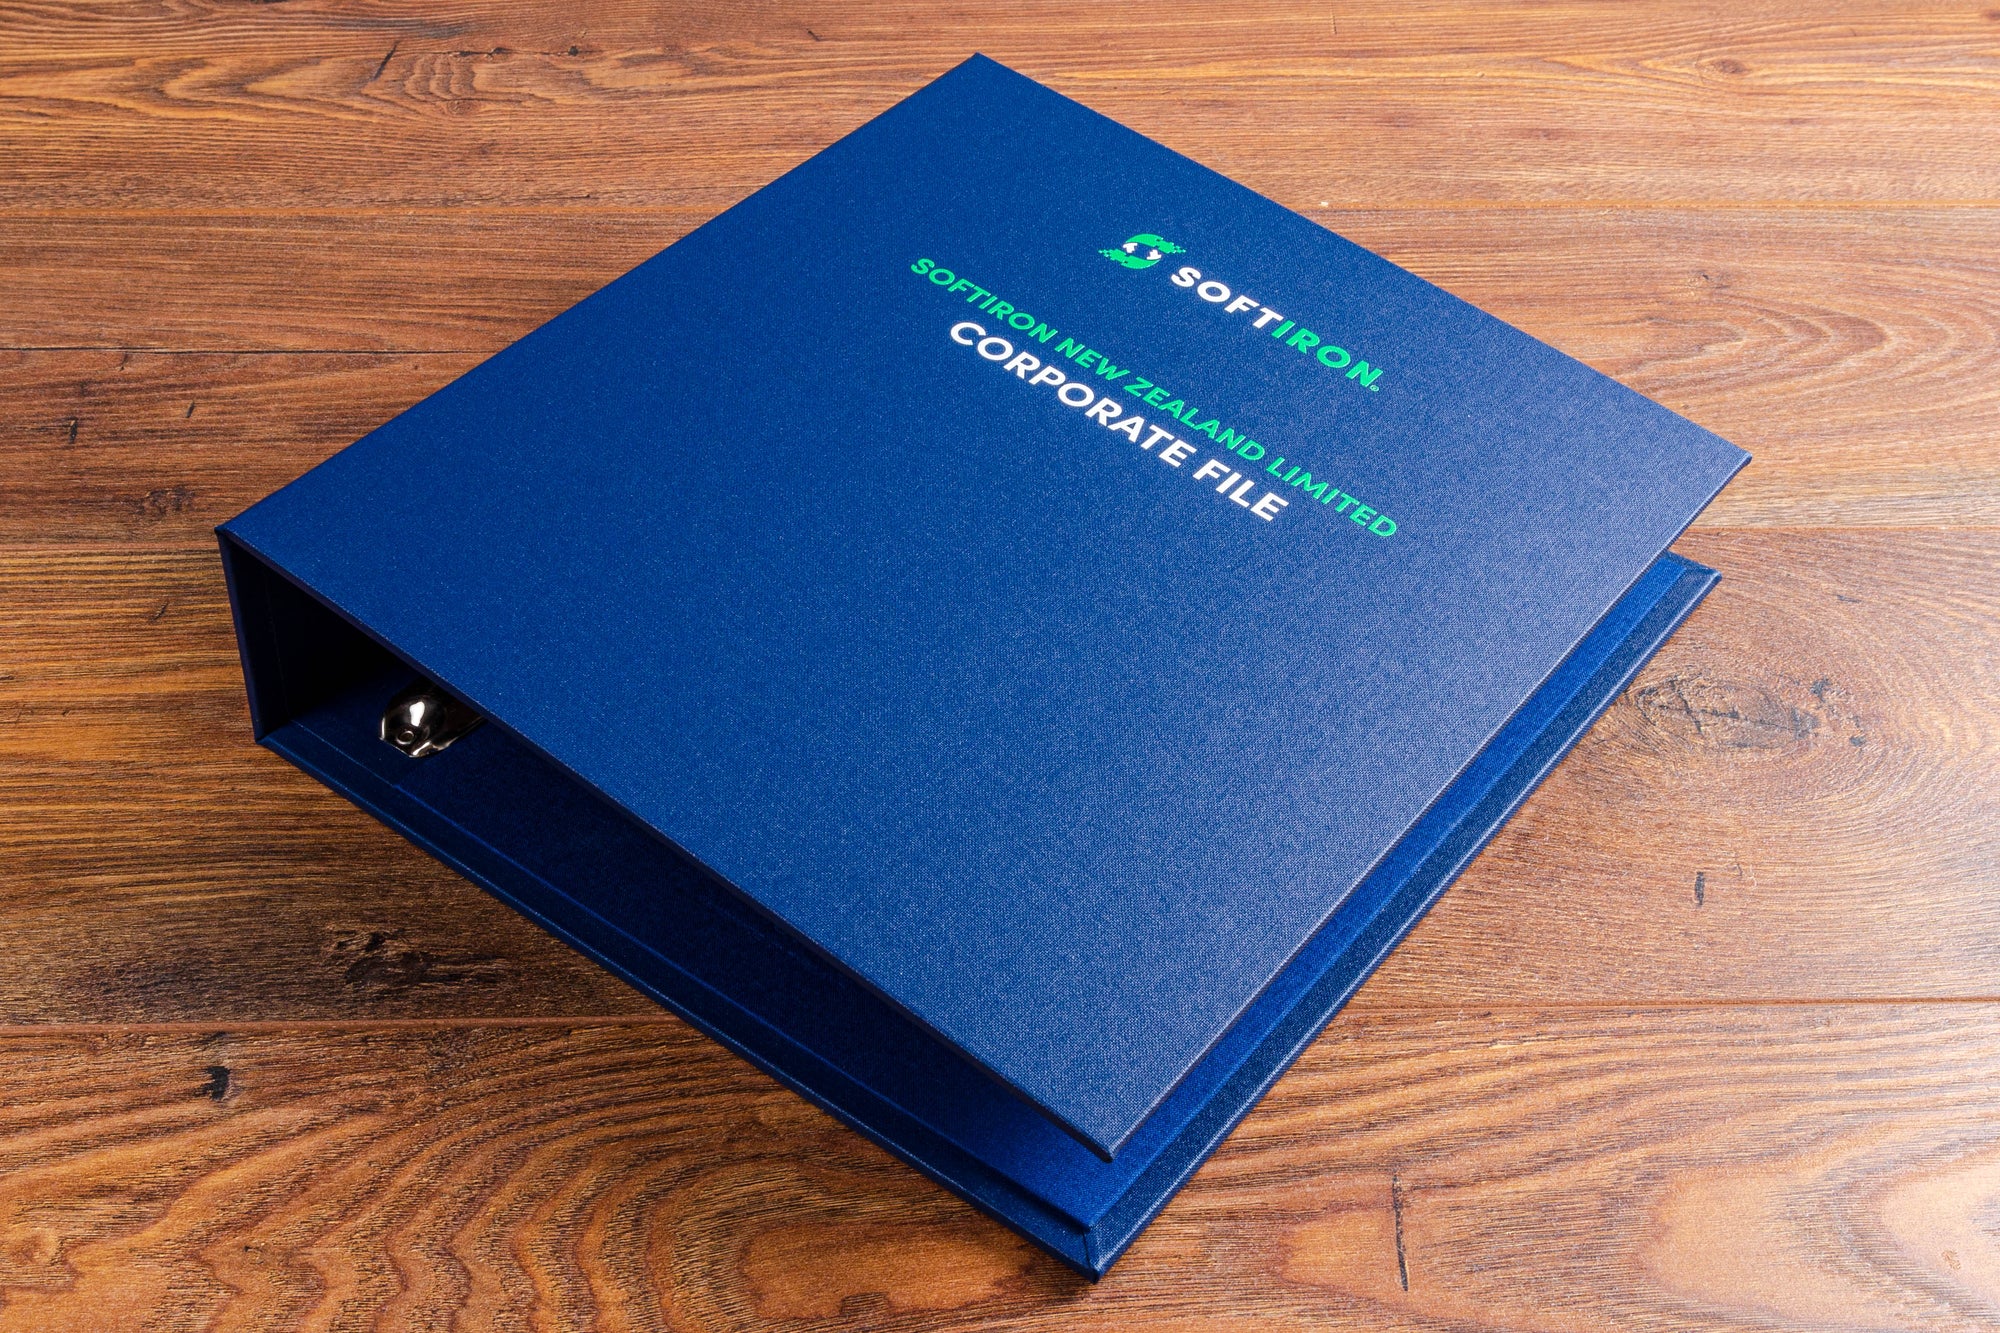 UV printed printed cover on A4 presentation binder personalised by H&Co.